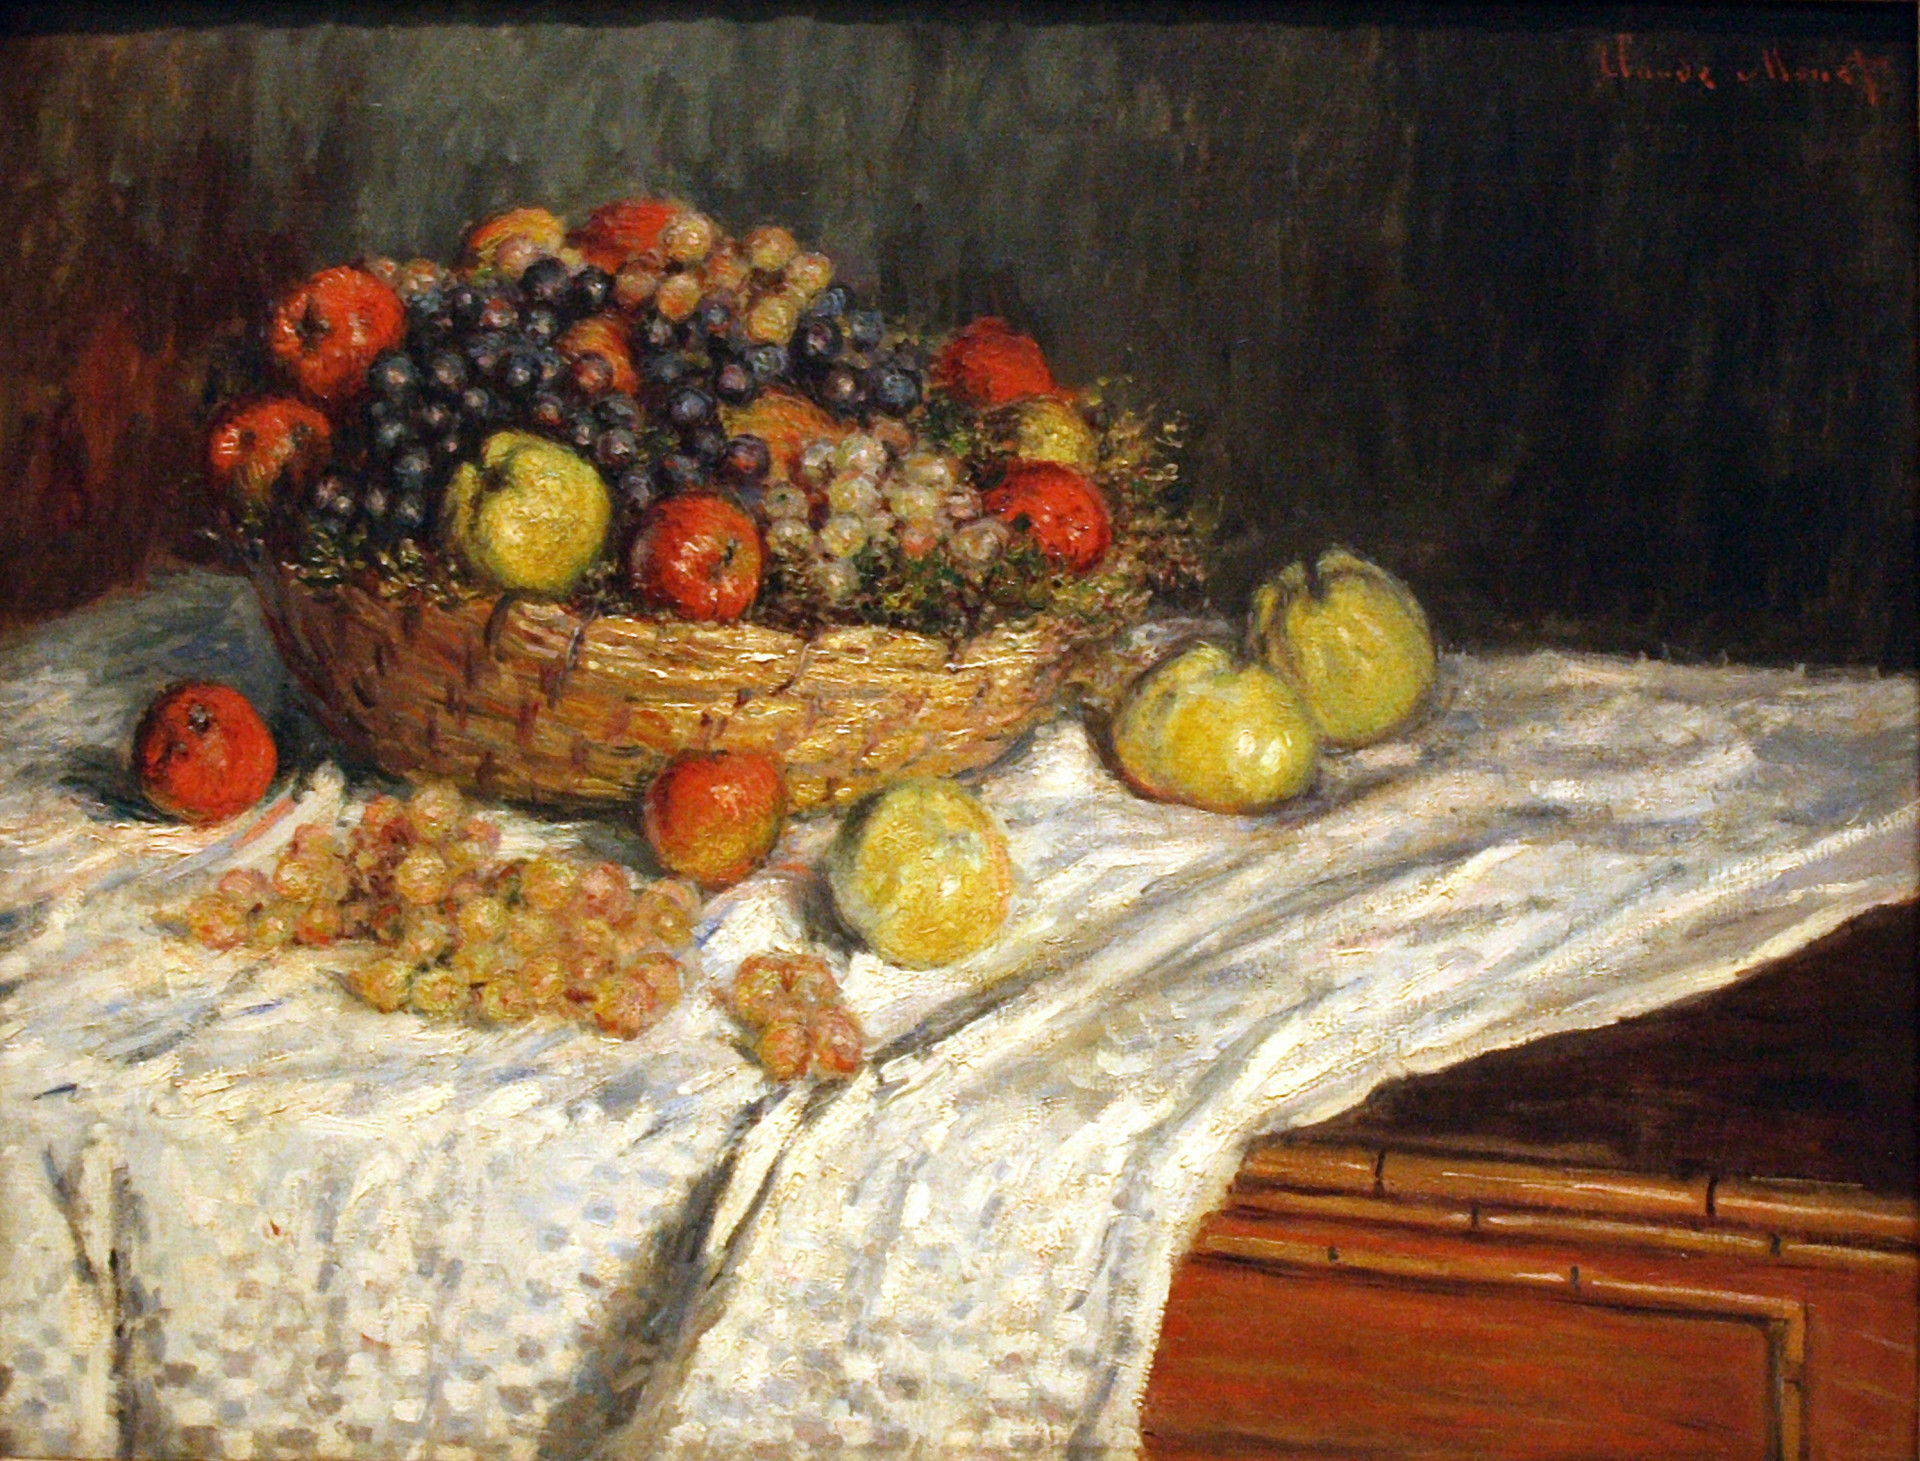 Monet's Apples and Grapes, circa 1879-80